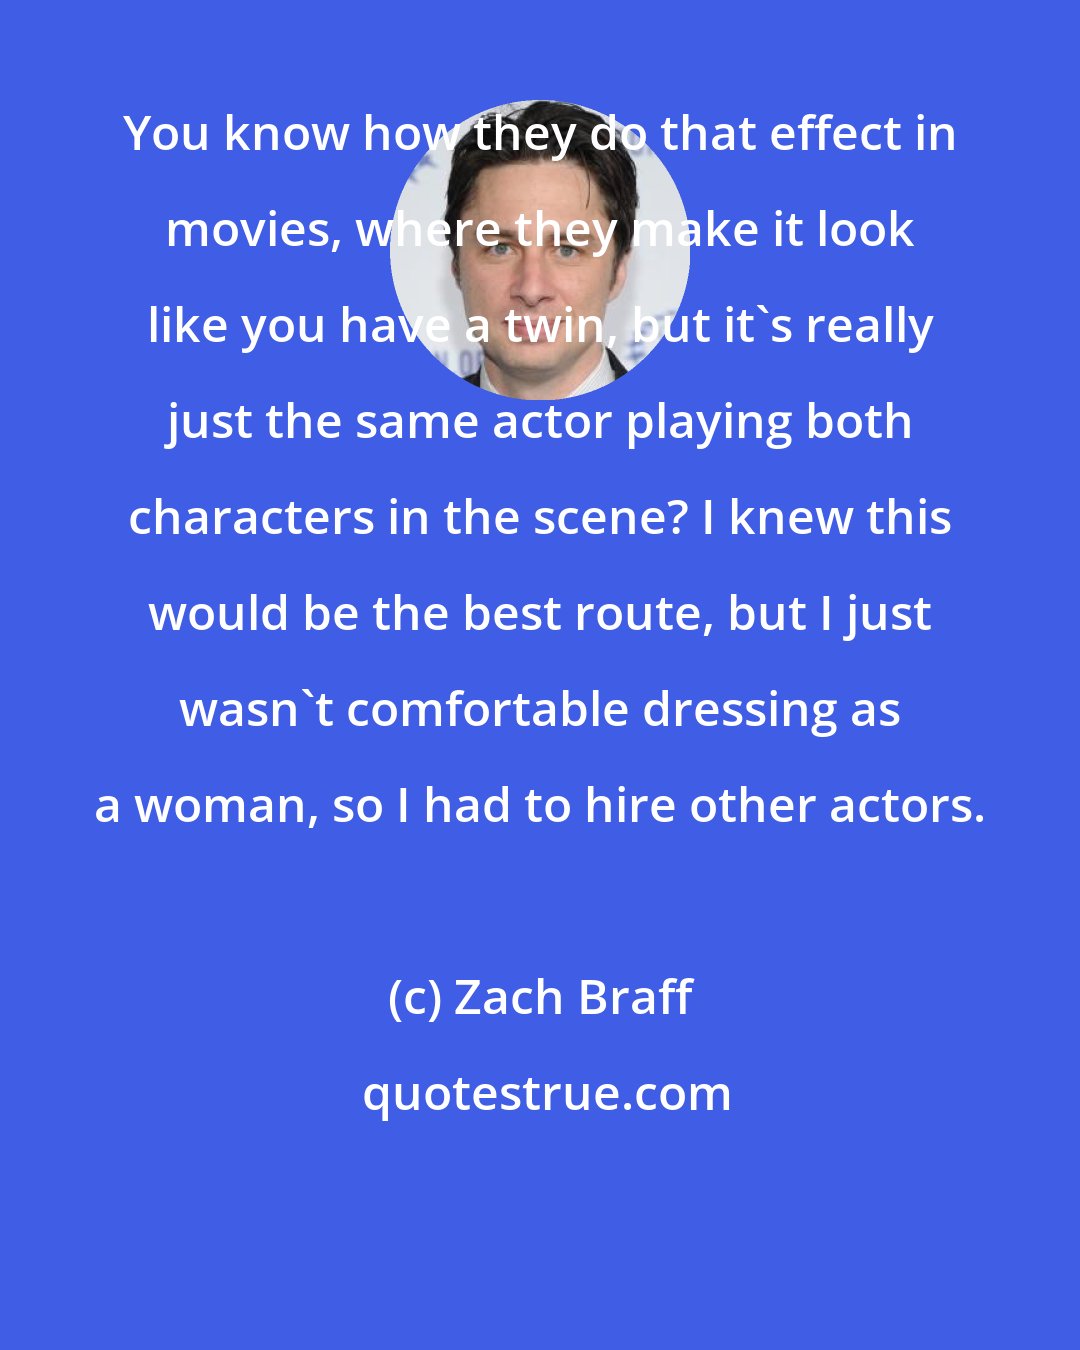 Zach Braff: You know how they do that effect in movies, where they make it look like you have a twin, but it's really just the same actor playing both characters in the scene? I knew this would be the best route, but I just wasn't comfortable dressing as a woman, so I had to hire other actors.